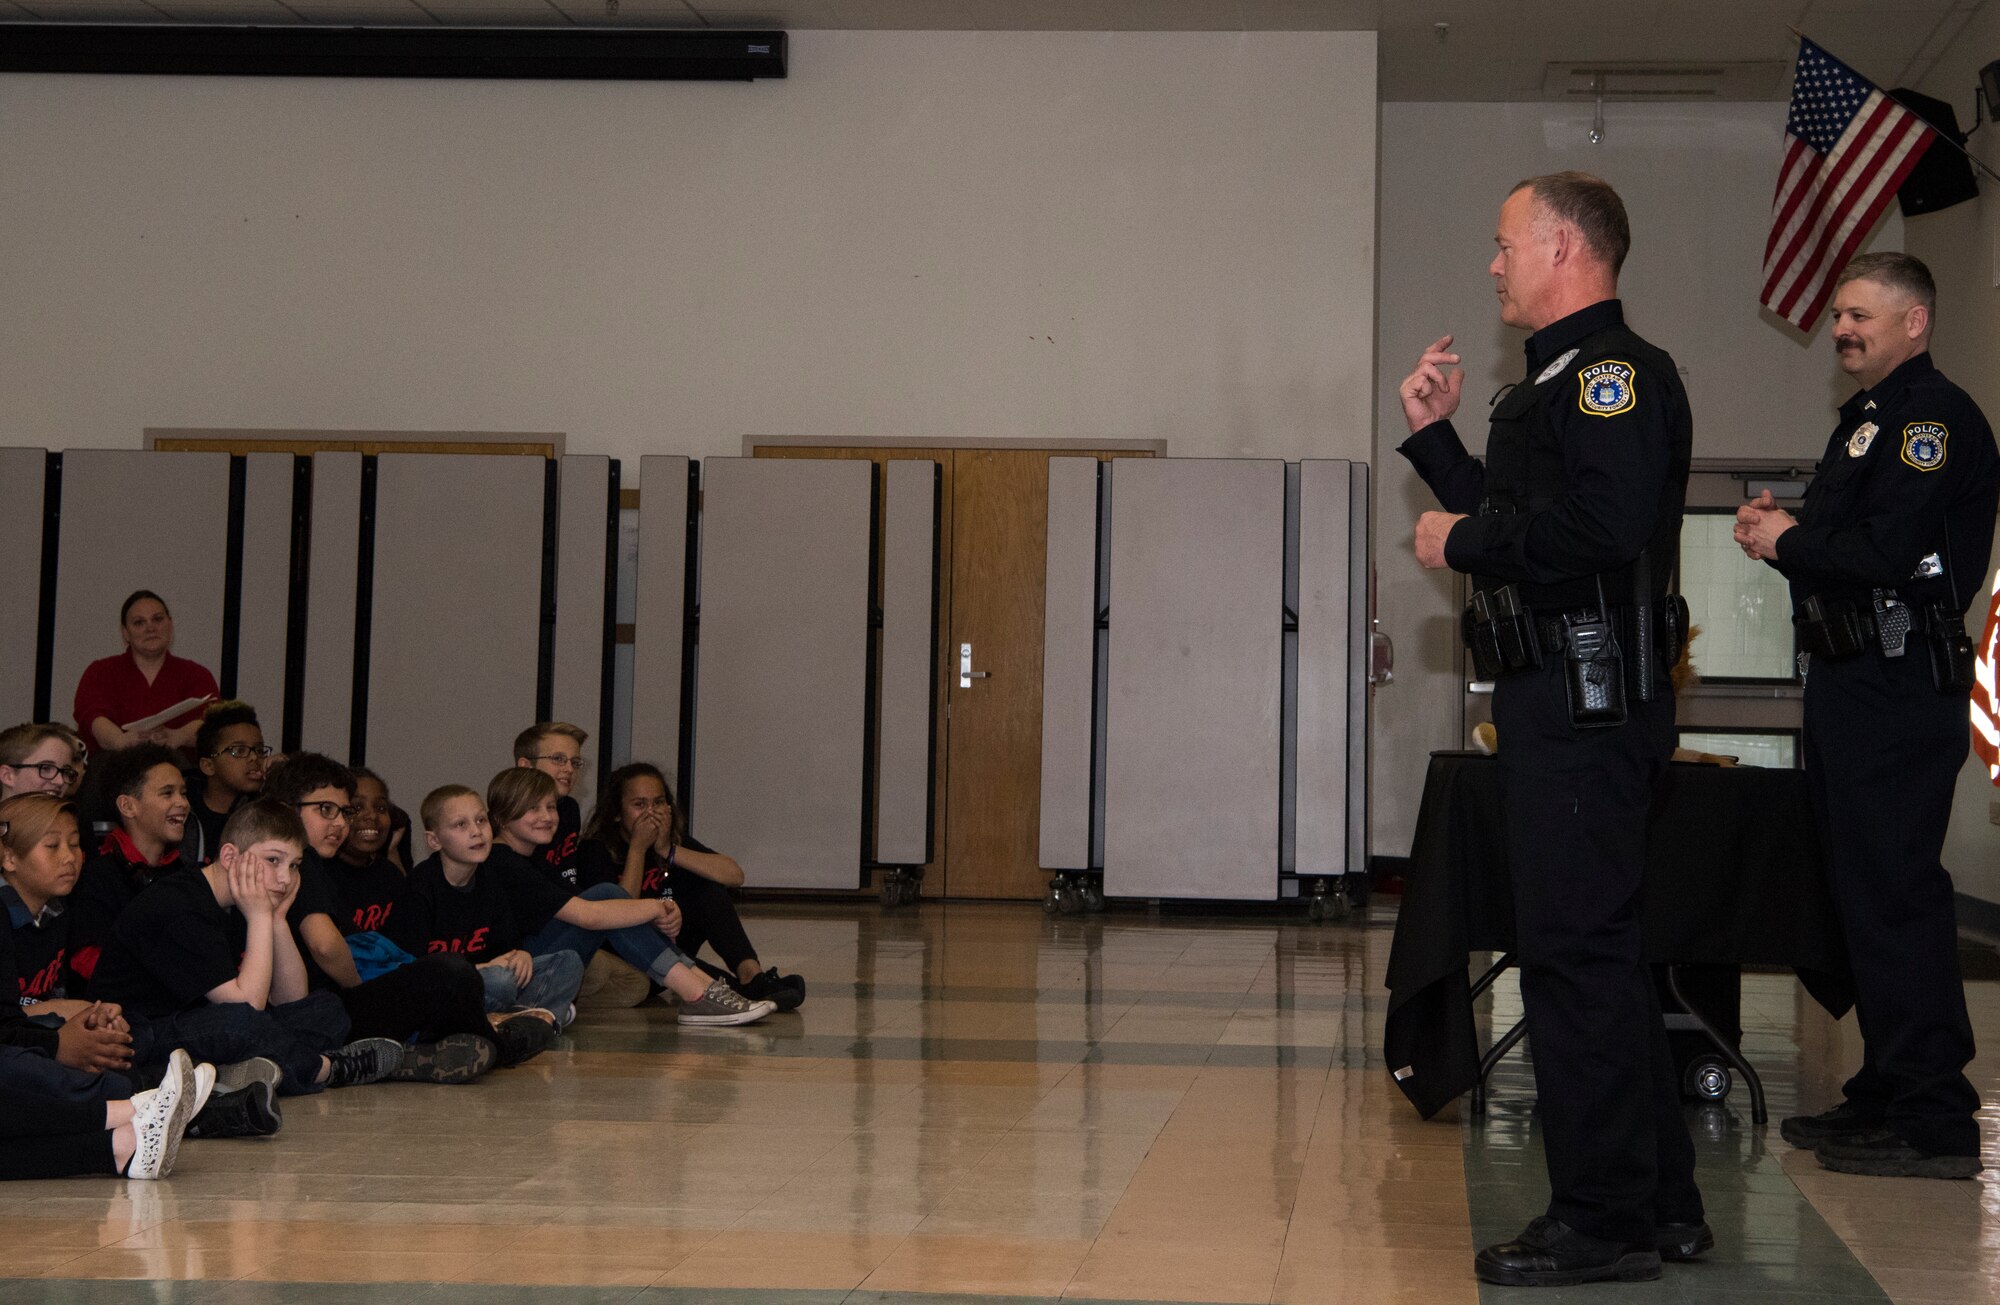 Police officers from the 673d Security Forces Squadron speak with students from the Drug Abuse Resistance Education program at Ursa Major Elementary School at Joint Base Elmendorf-Richardson, Alaska, May 2, 2018. D.A.R.E. is a program designed to provide students with the knowledge and tools they need to resist drugs, alcohol and other high-risk behaviors.